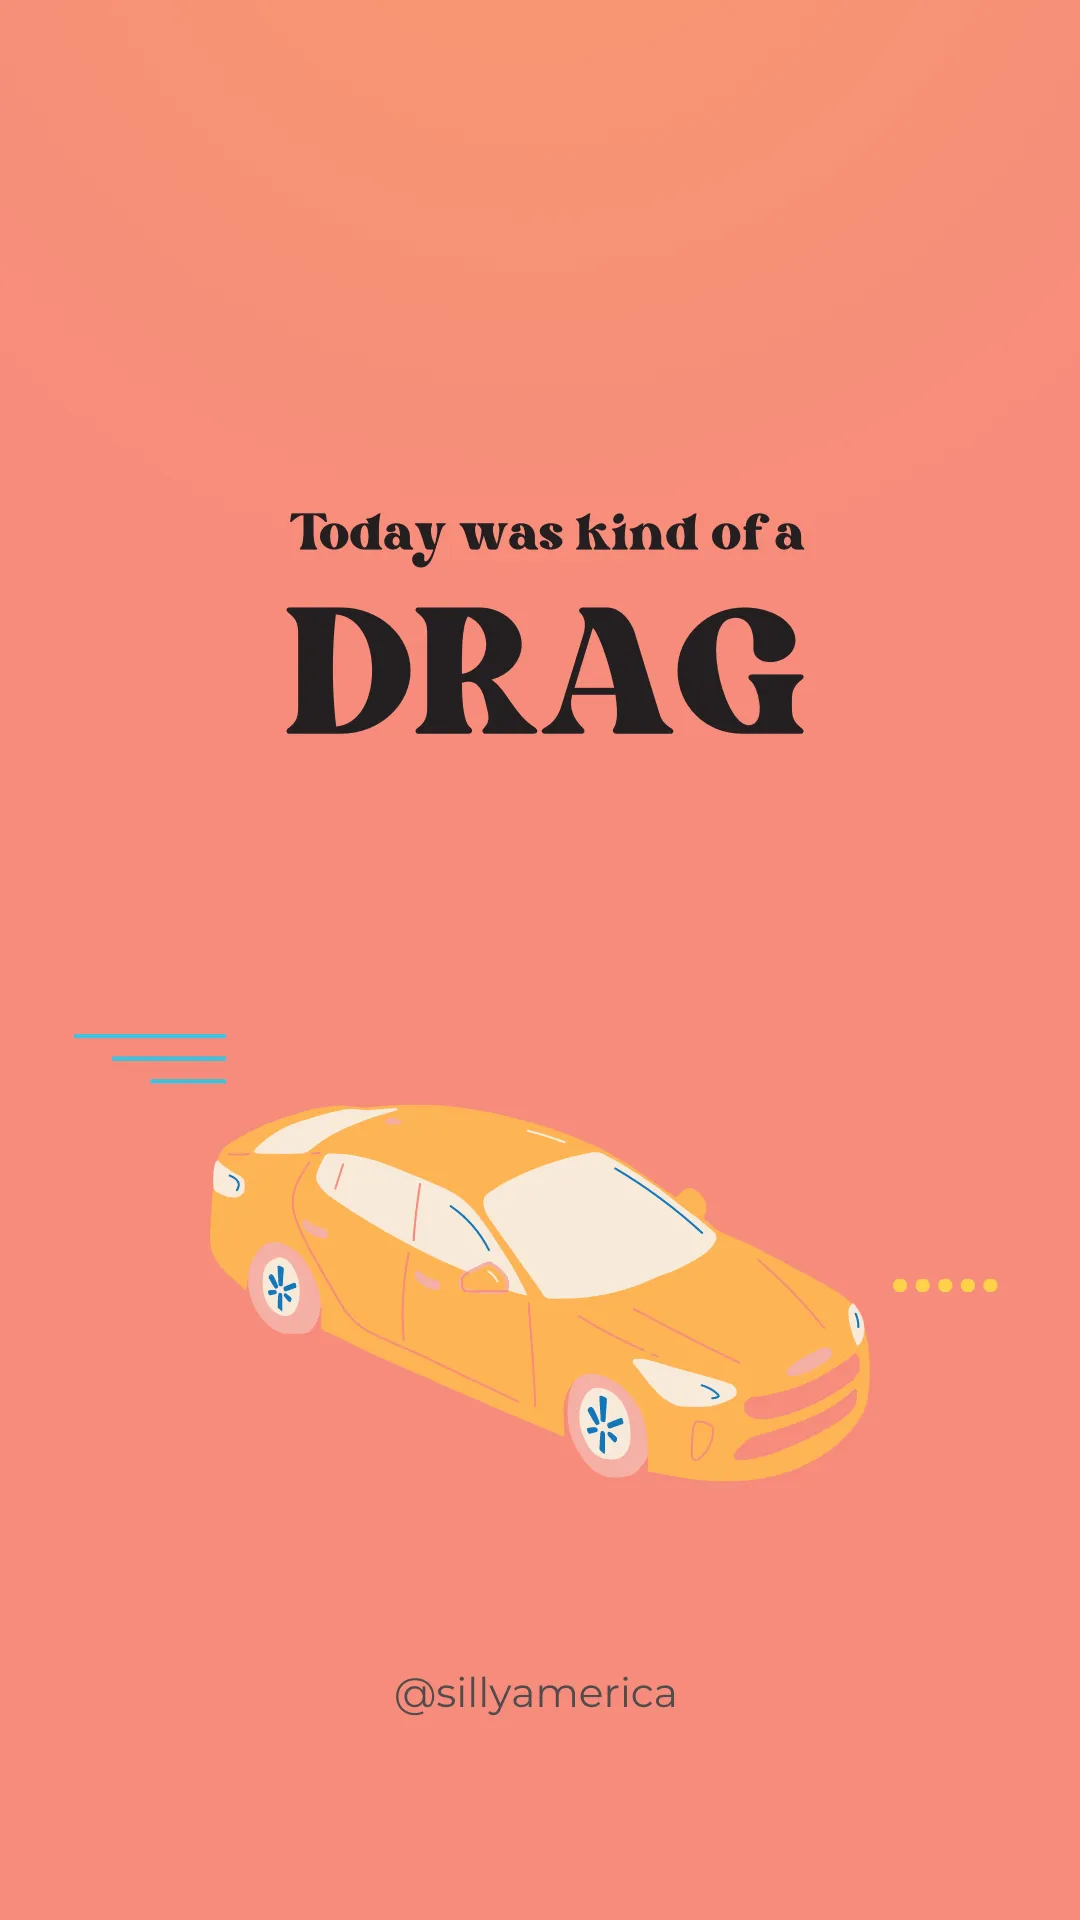 Not going to lie, today was kind of a DRAG! - Road Trip Puns